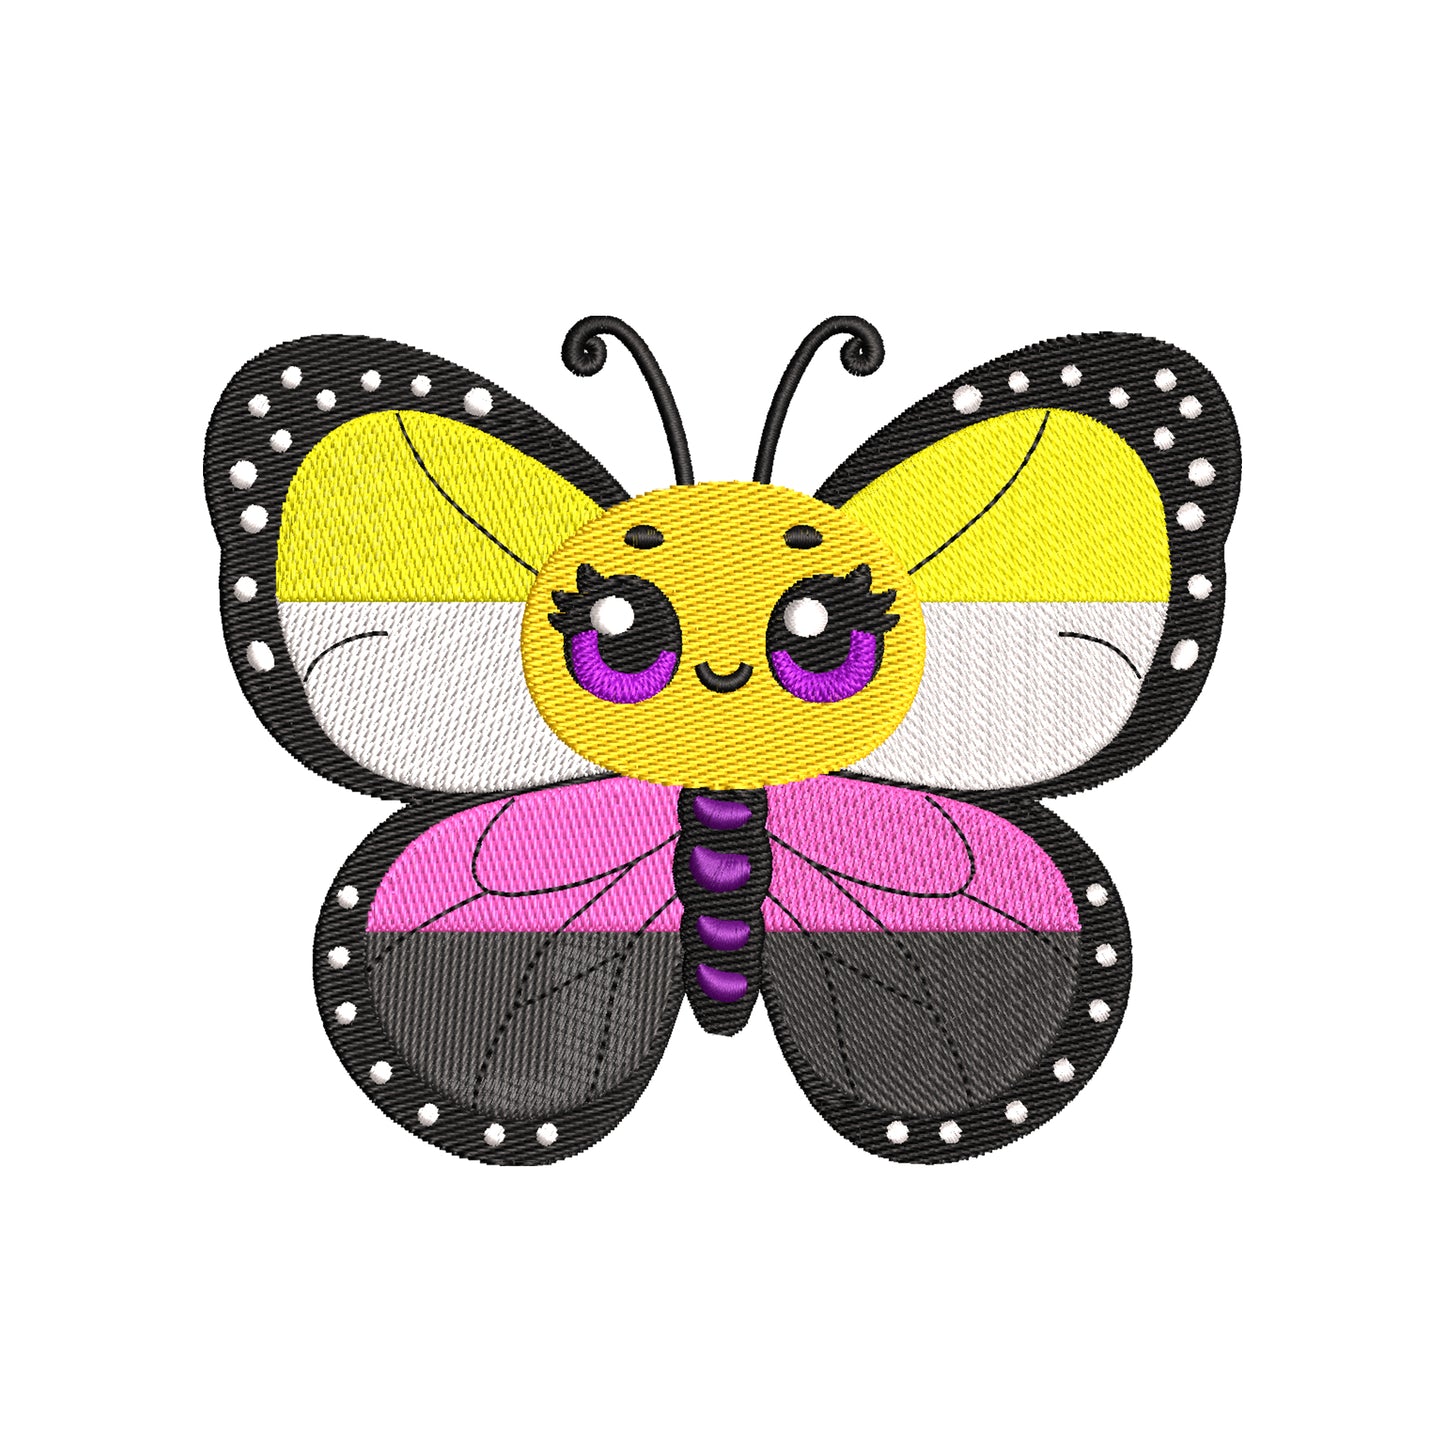 Nonbinary flag embroidery designs butterfly lgbtq pride - 1010061